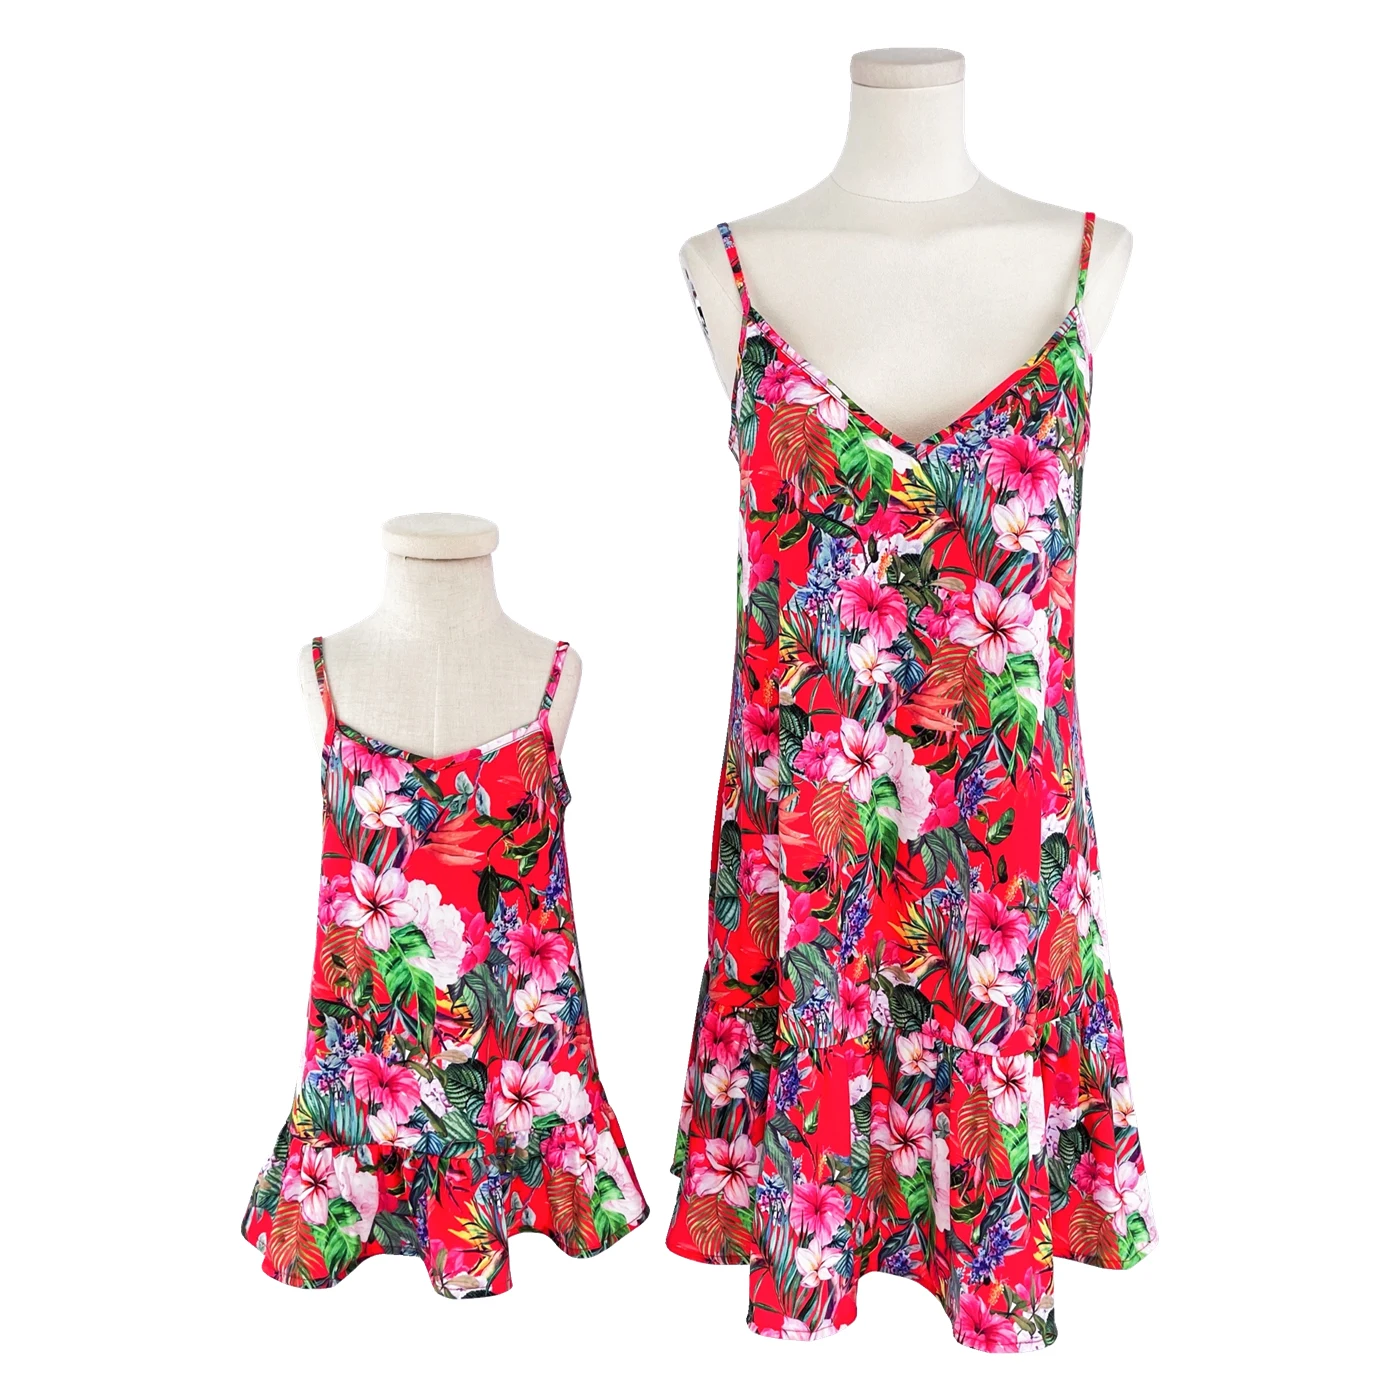 JOYCCIN 2022 SS New Mother And Daughter Floral Print Sleeveless Princess Party Dress 2color(722005) family clothes set